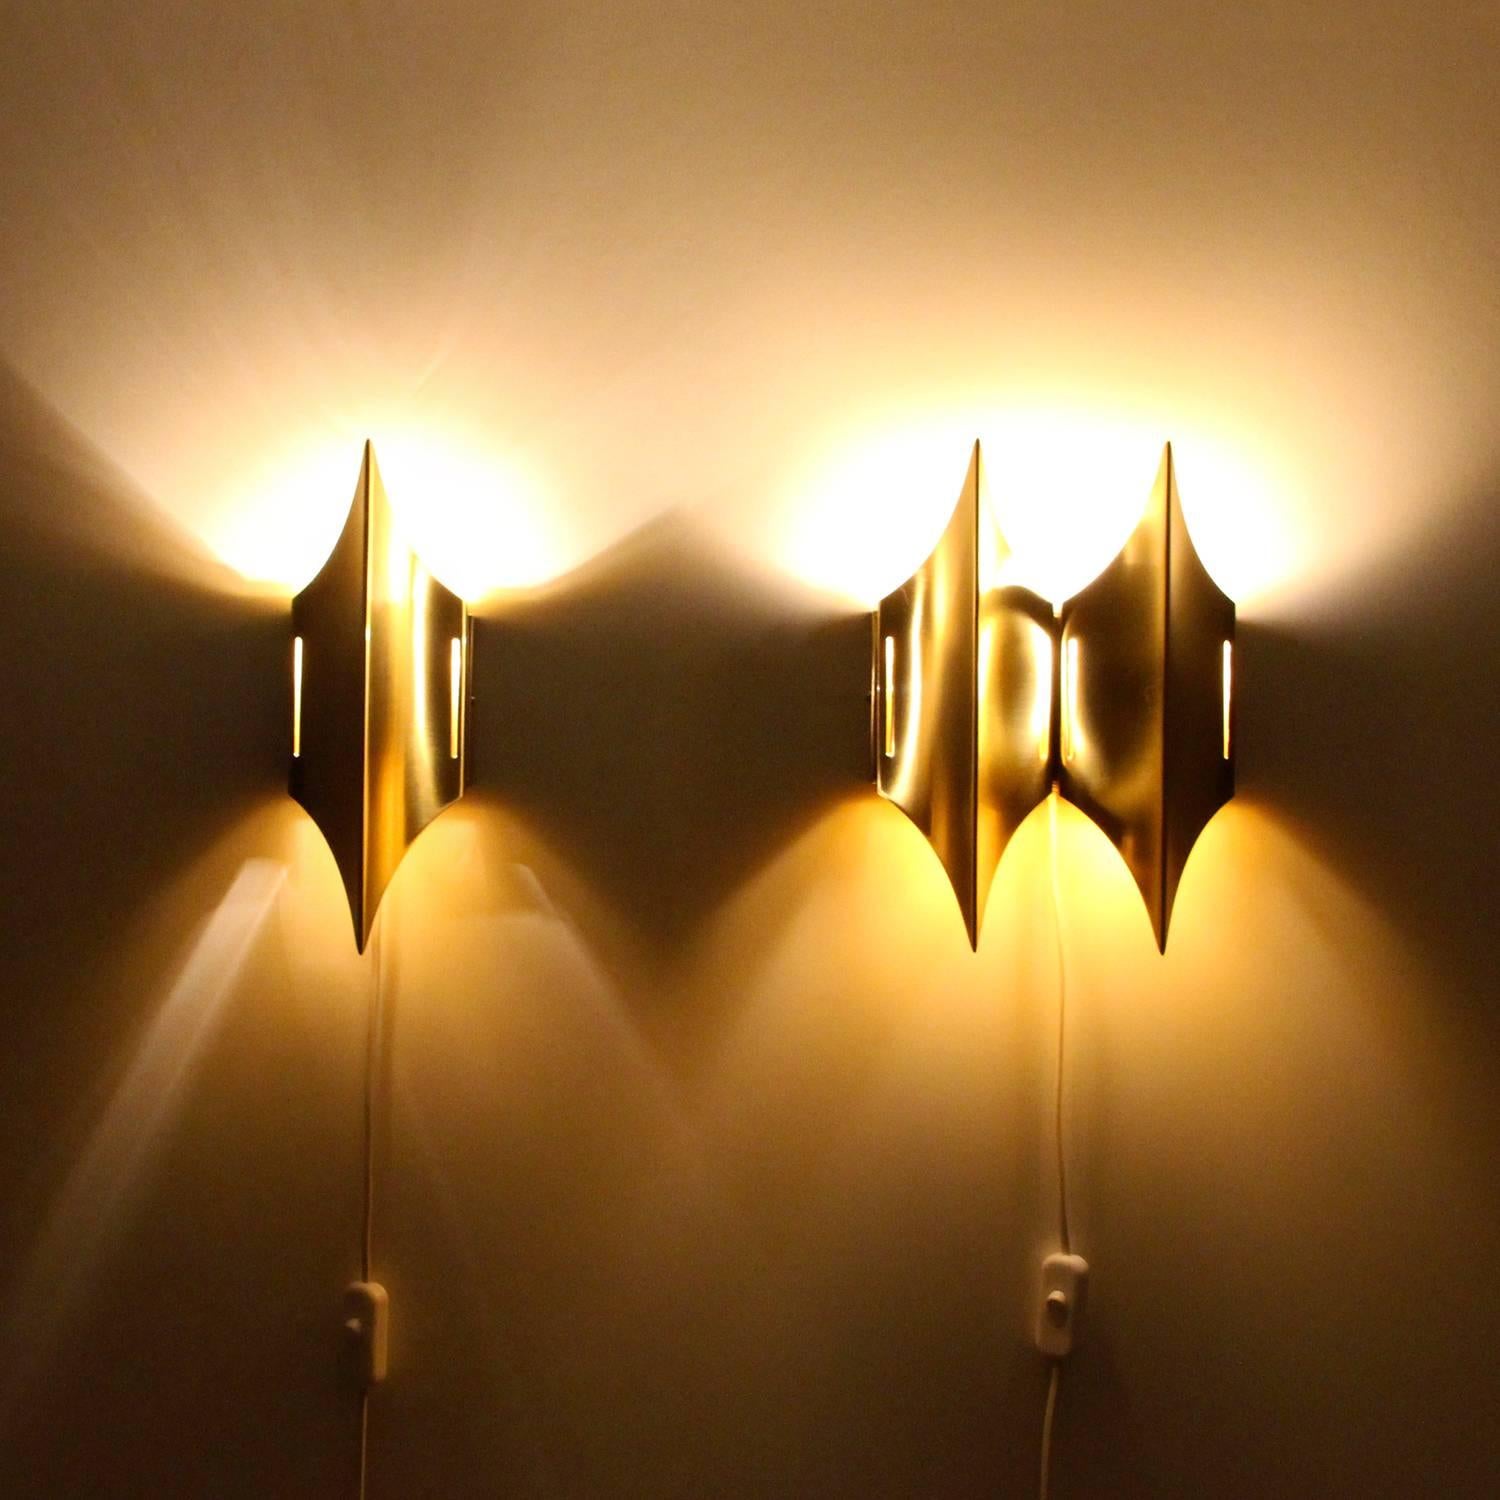 Gothic 1 + 2 wall lights by unspecified designer for Lyfa in the 1970s - gorgeous set of two brass wall lamps in near excellent vintage condition.

Truly magnificent set of sconces comprised of elegant pointy brass shades on square brass wall